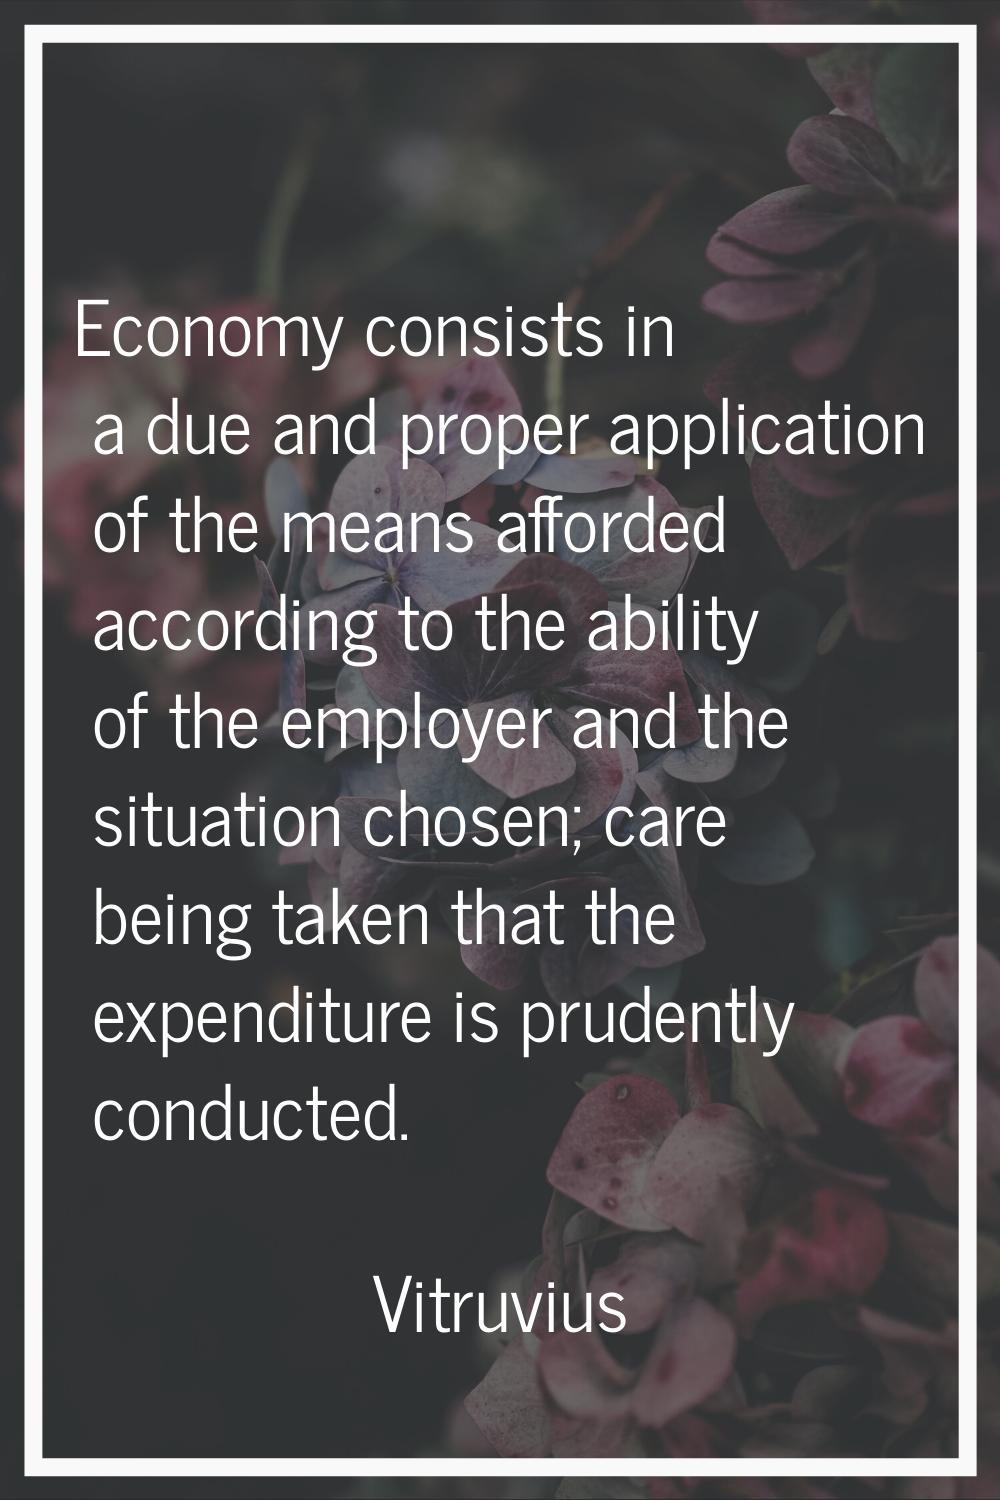 Economy consists in a due and proper application of the means afforded according to the ability of 